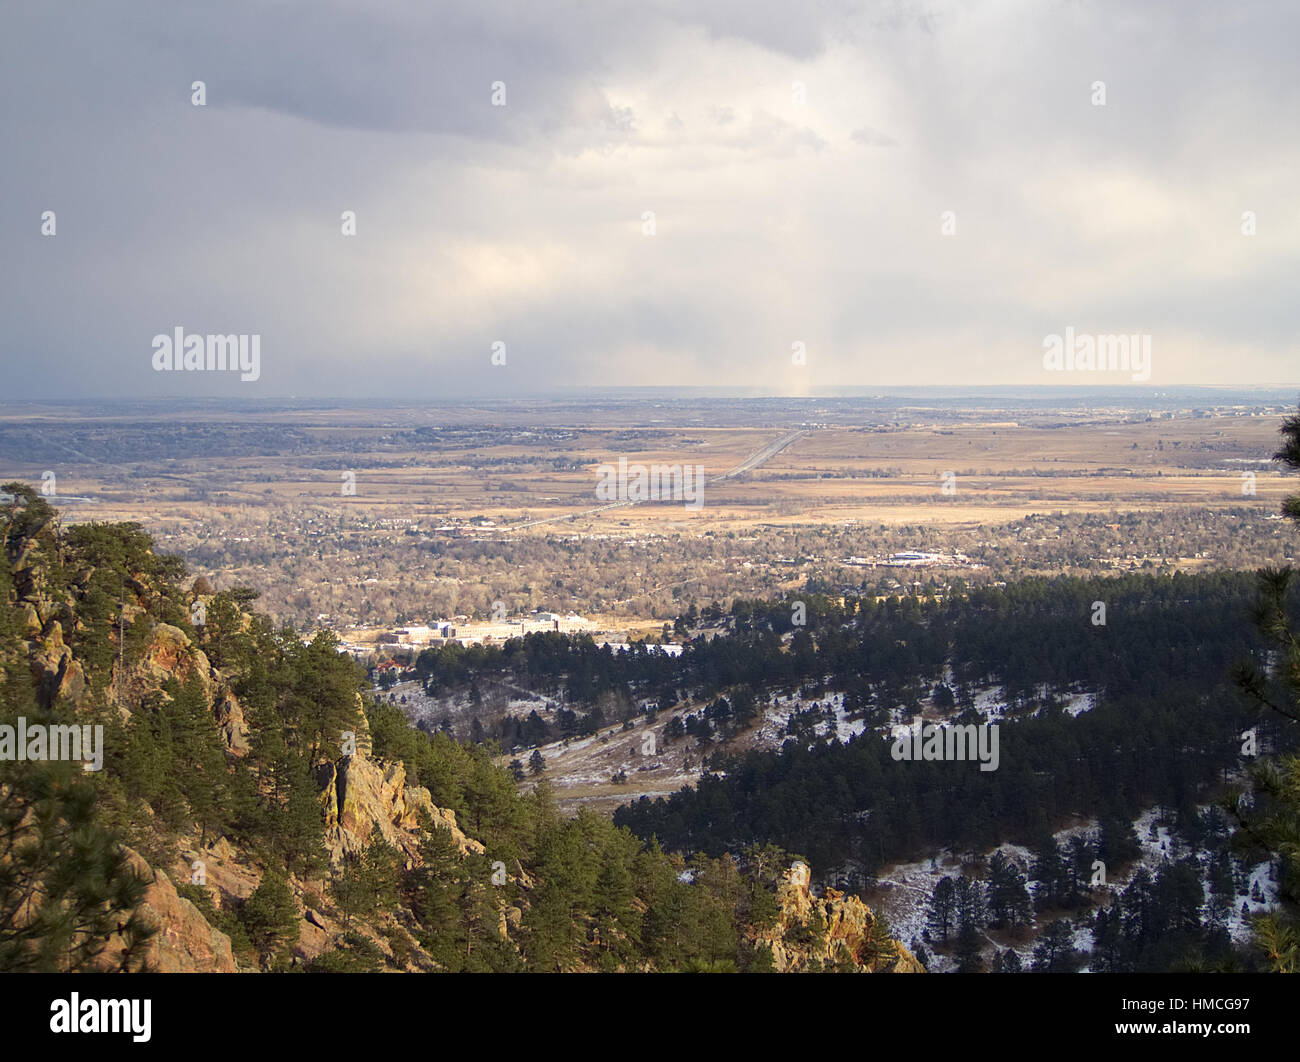 A view from Colorado's City of Boulder Open Space and Mountain Parks of the start of the great plains and the Denver-Boulder Turnpike. Stock Photo